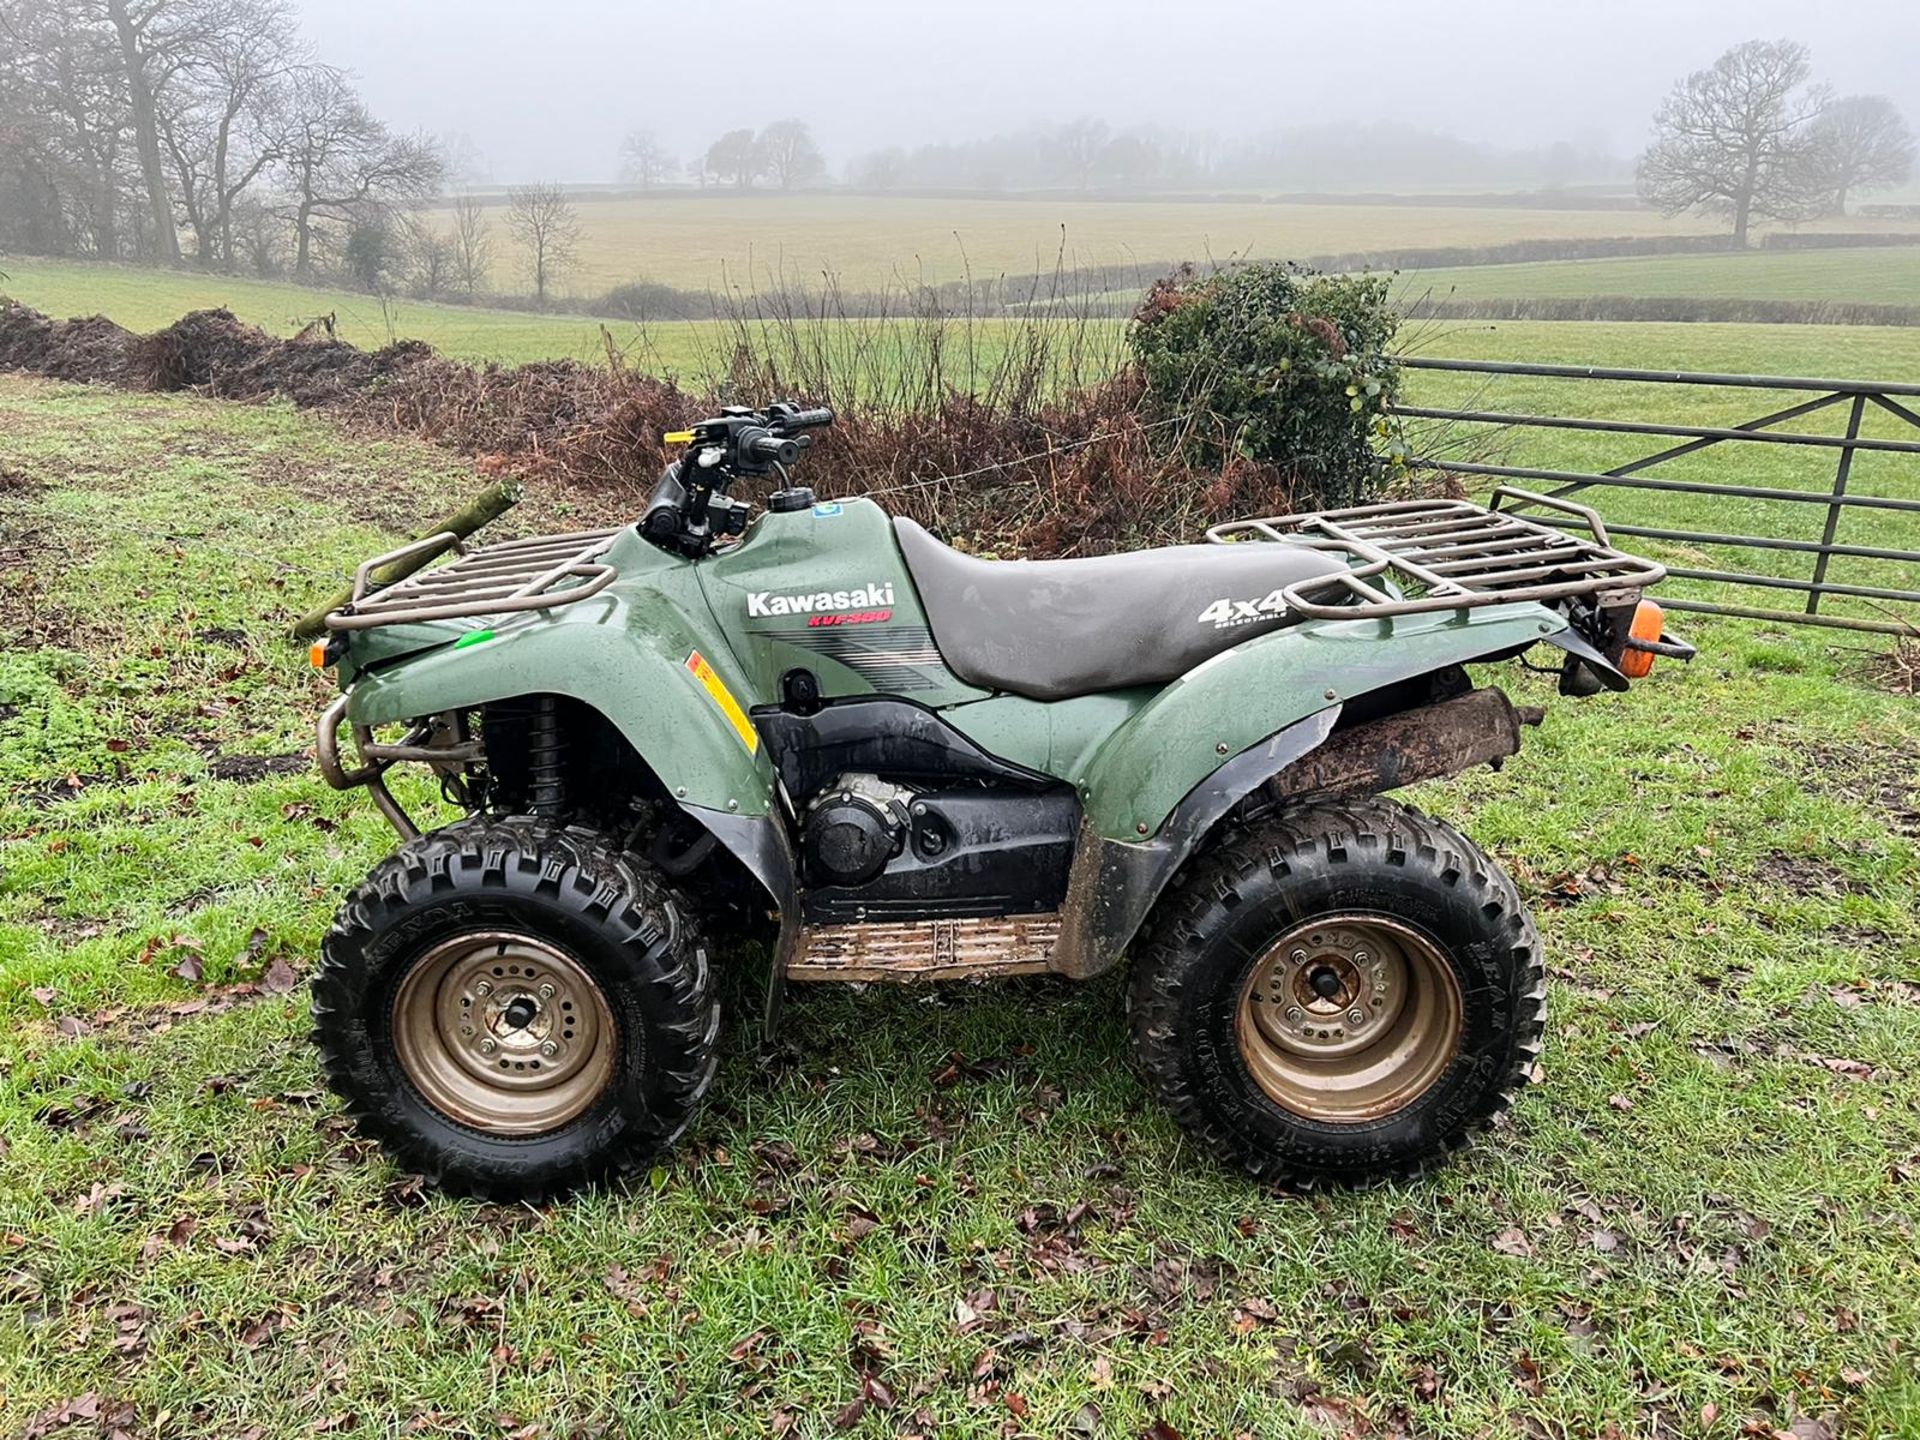 KAWASAKI KVF360 4WD FARM QUAD BIKE, RUNS AND DRIVES WELL, SHOWING A LOW 3438 HOURS PLUS VAT* - Image 4 of 13